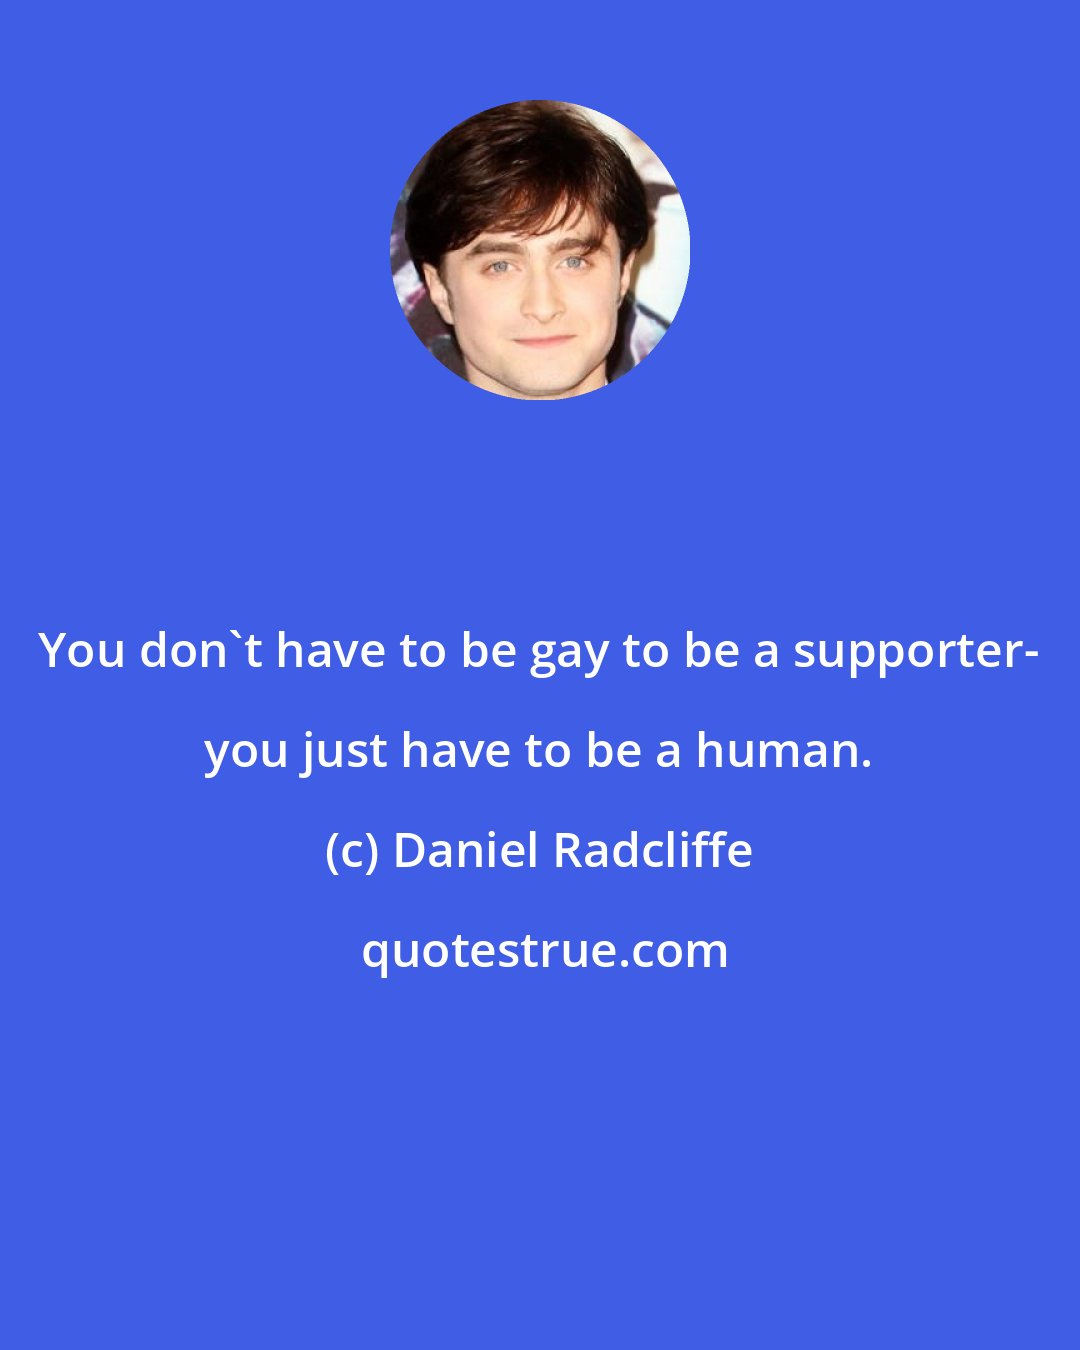 Daniel Radcliffe: You don't have to be gay to be a supporter- you just have to be a human.